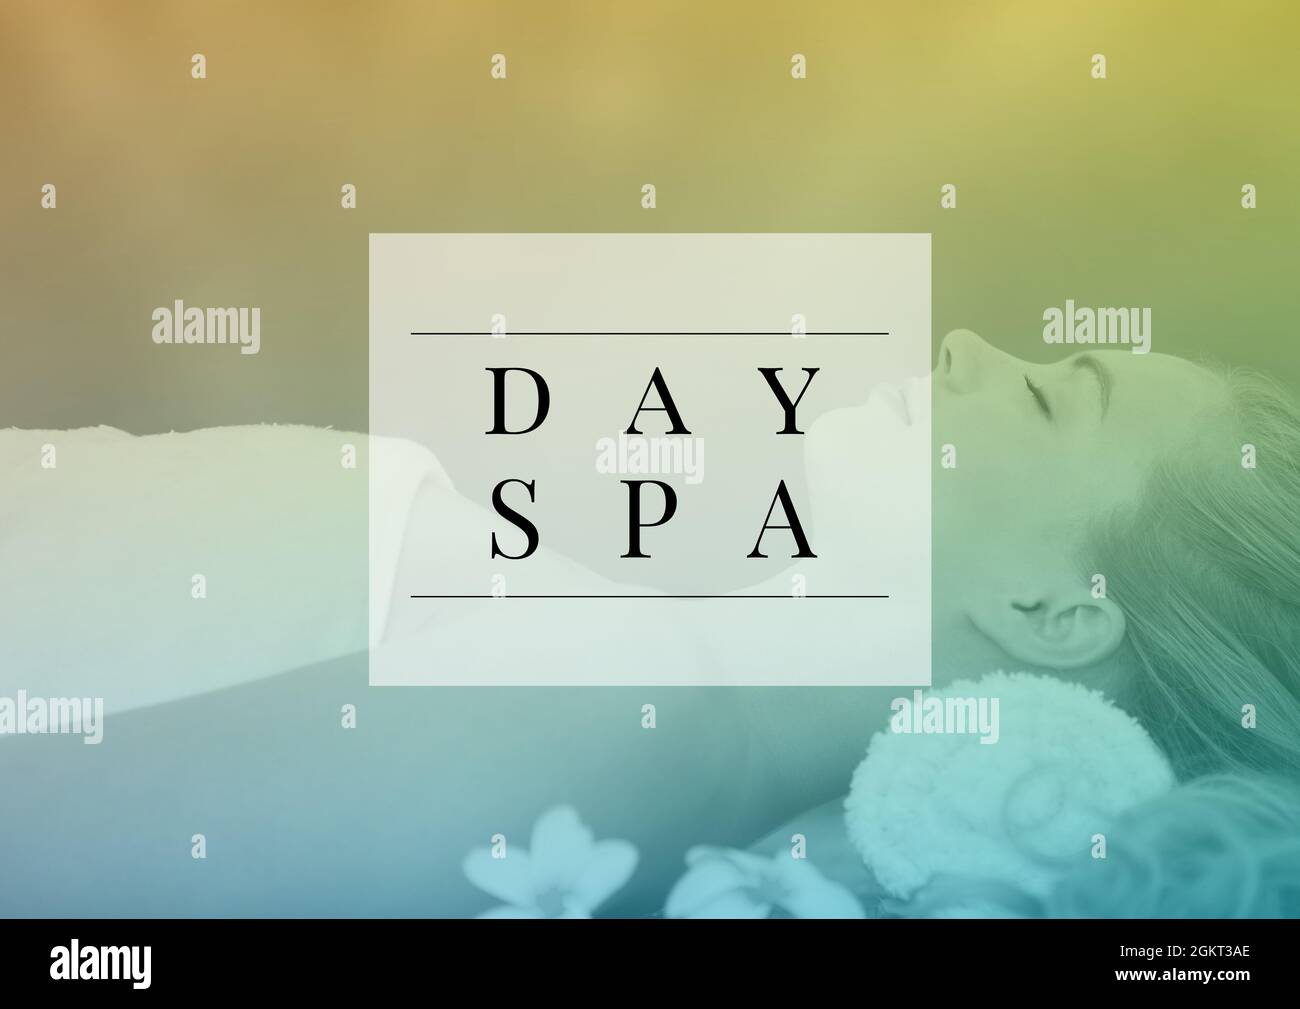 Day spa text banner over woman lying for a massage against gradient background Stock Photo